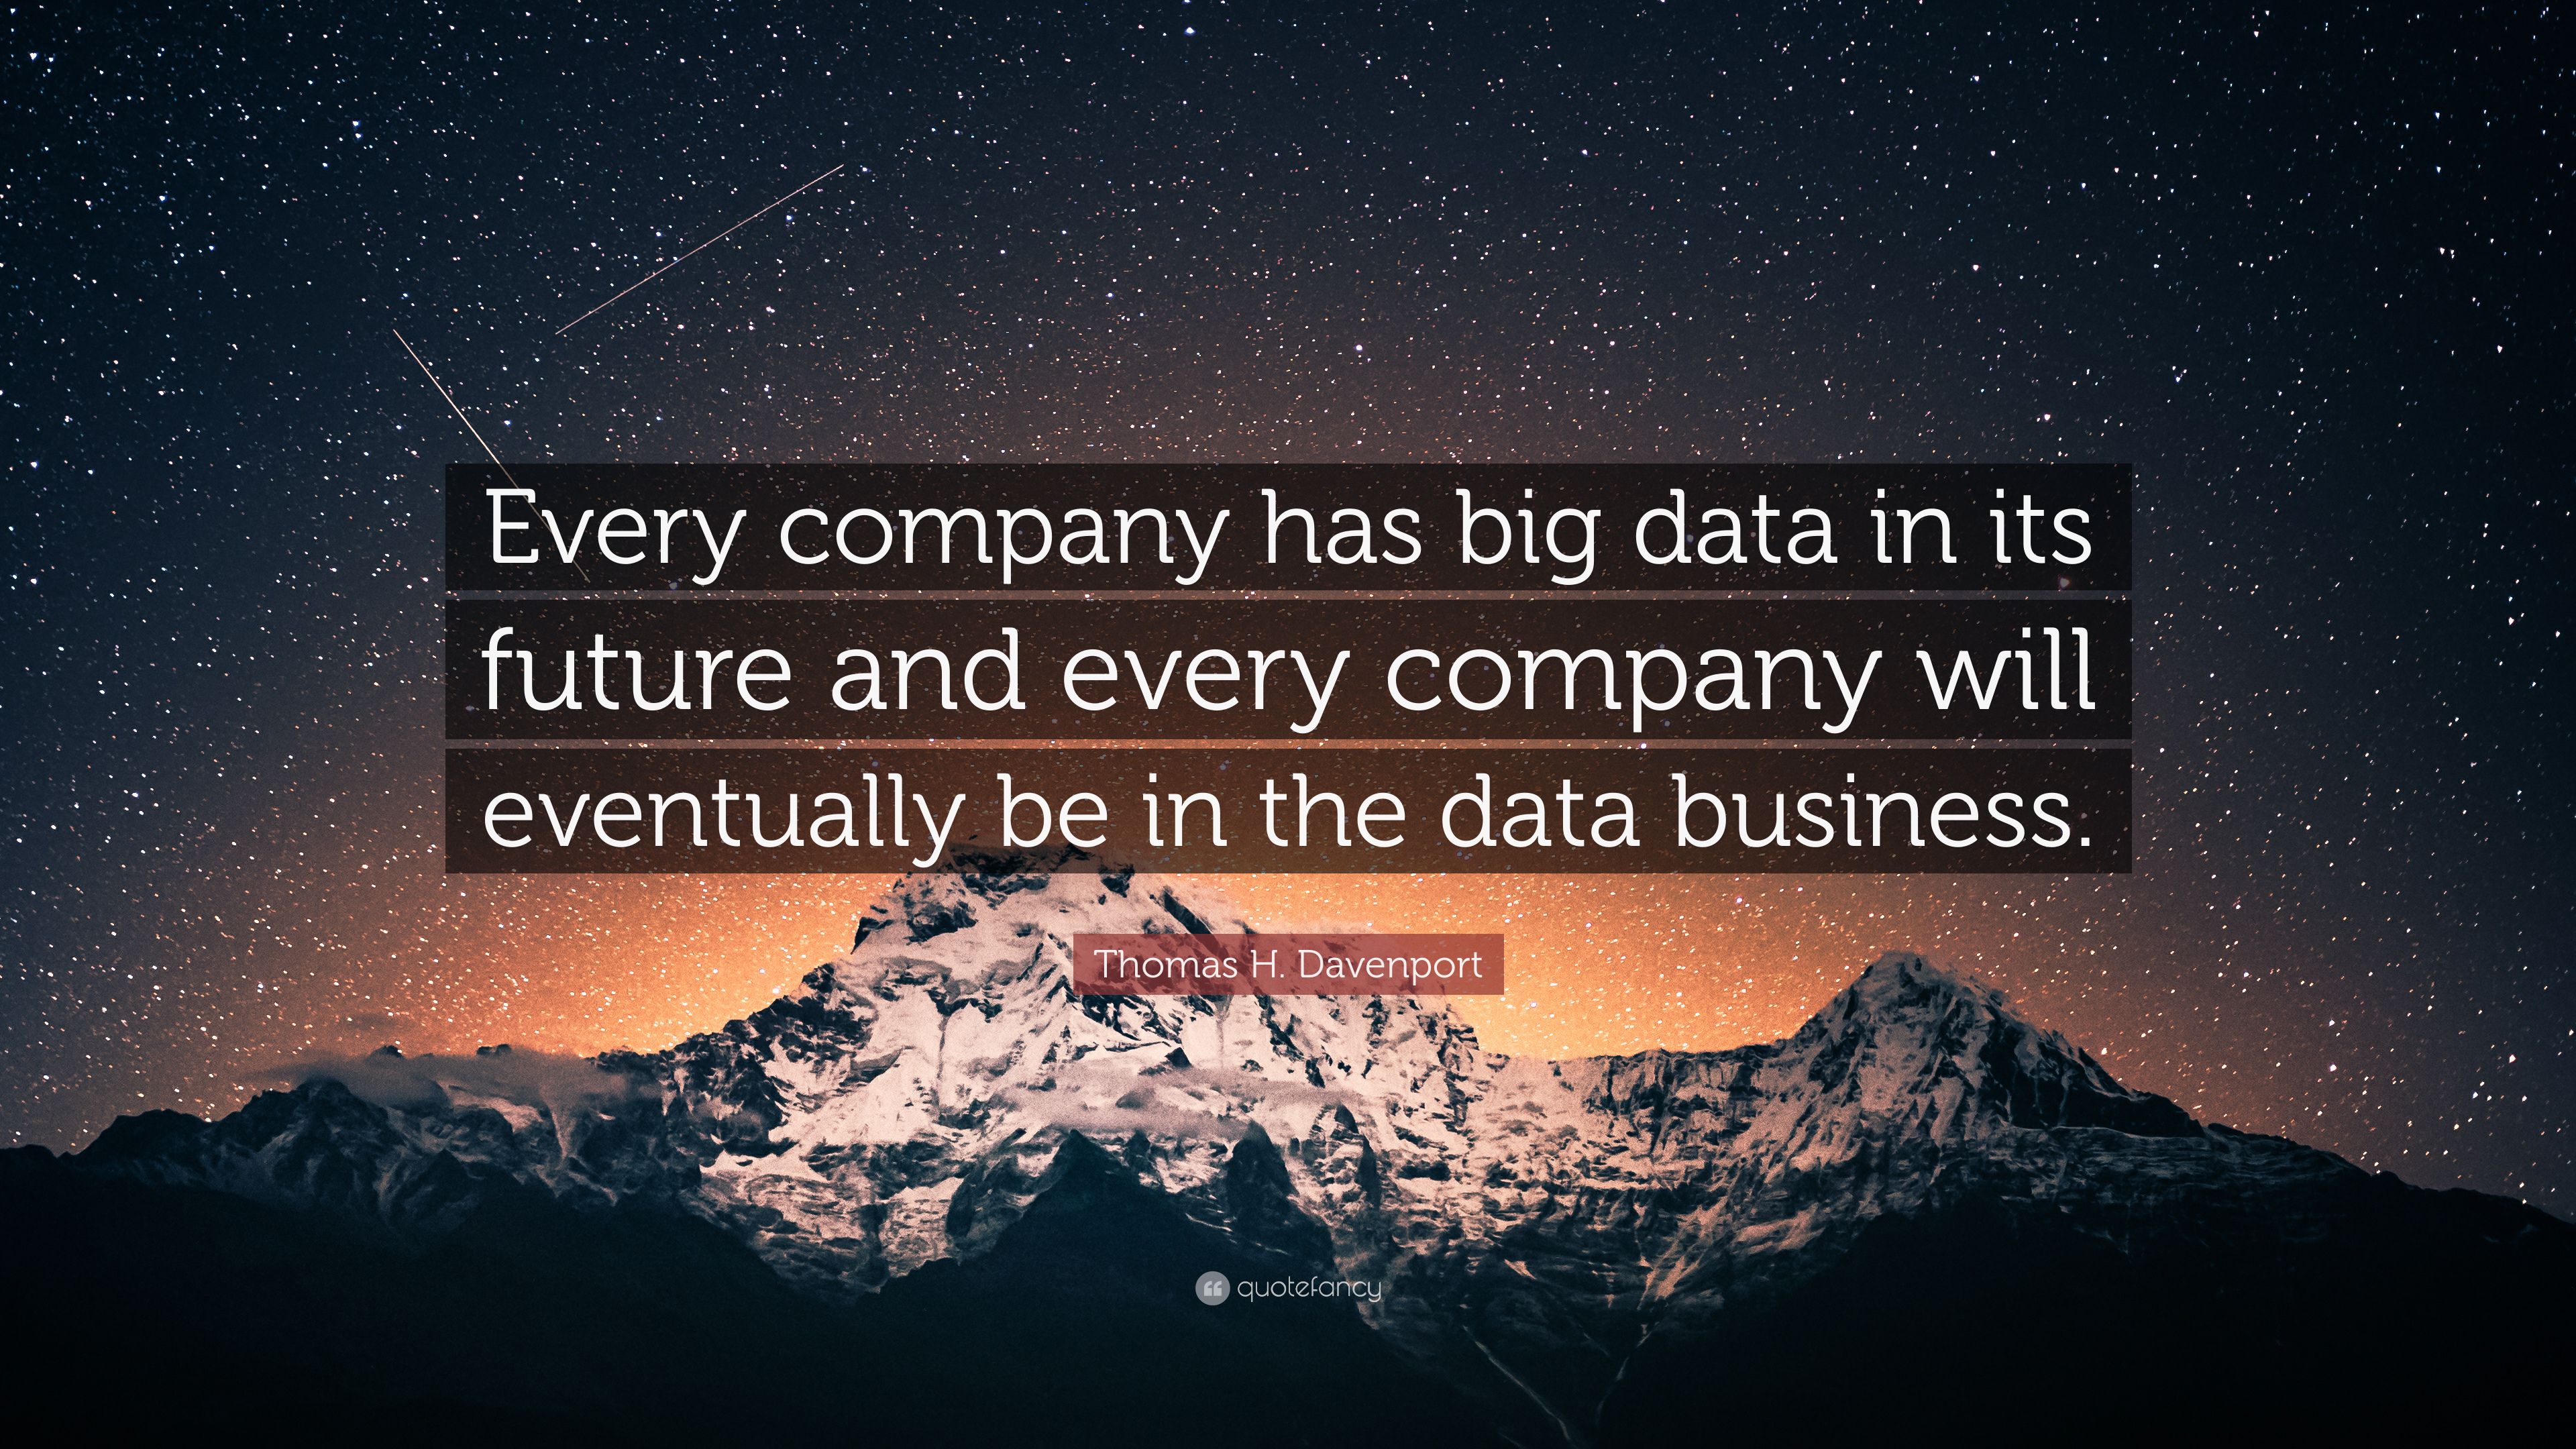 Thomas H. Davenport Quote: “Every company has big data in its future